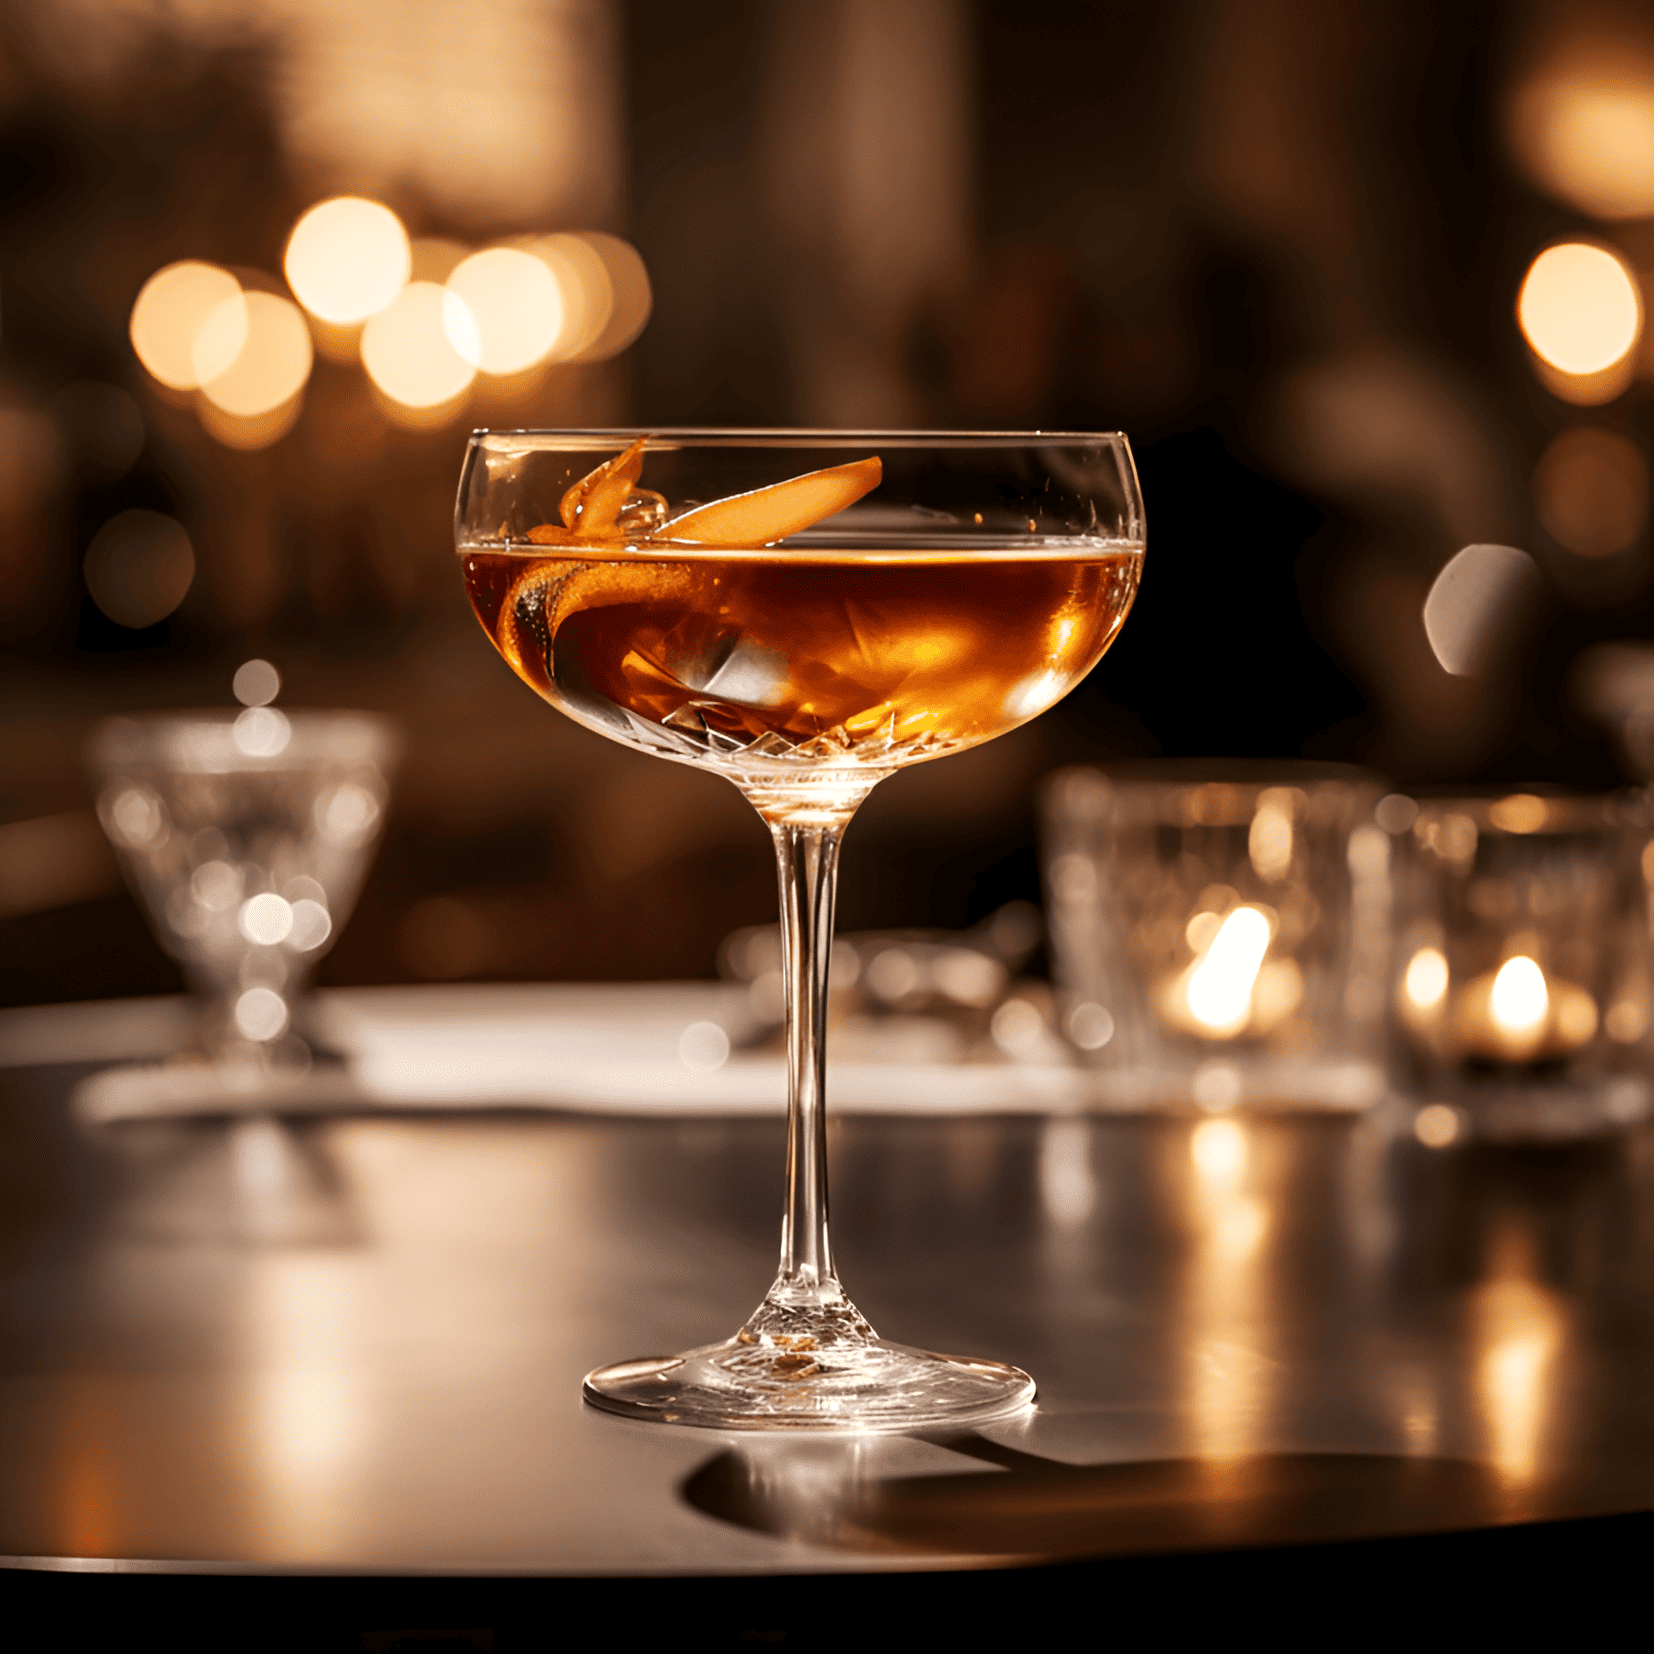 Metropolitan Cocktail Recipe - The Metropolitan cocktail offers a rich, smooth, and slightly sweet flavor profile. The brandy provides warmth and depth, while the sweet vermouth adds a touch of sweetness and herbal complexity. The bitters help to balance the sweetness and add a subtle spiciness to the drink.